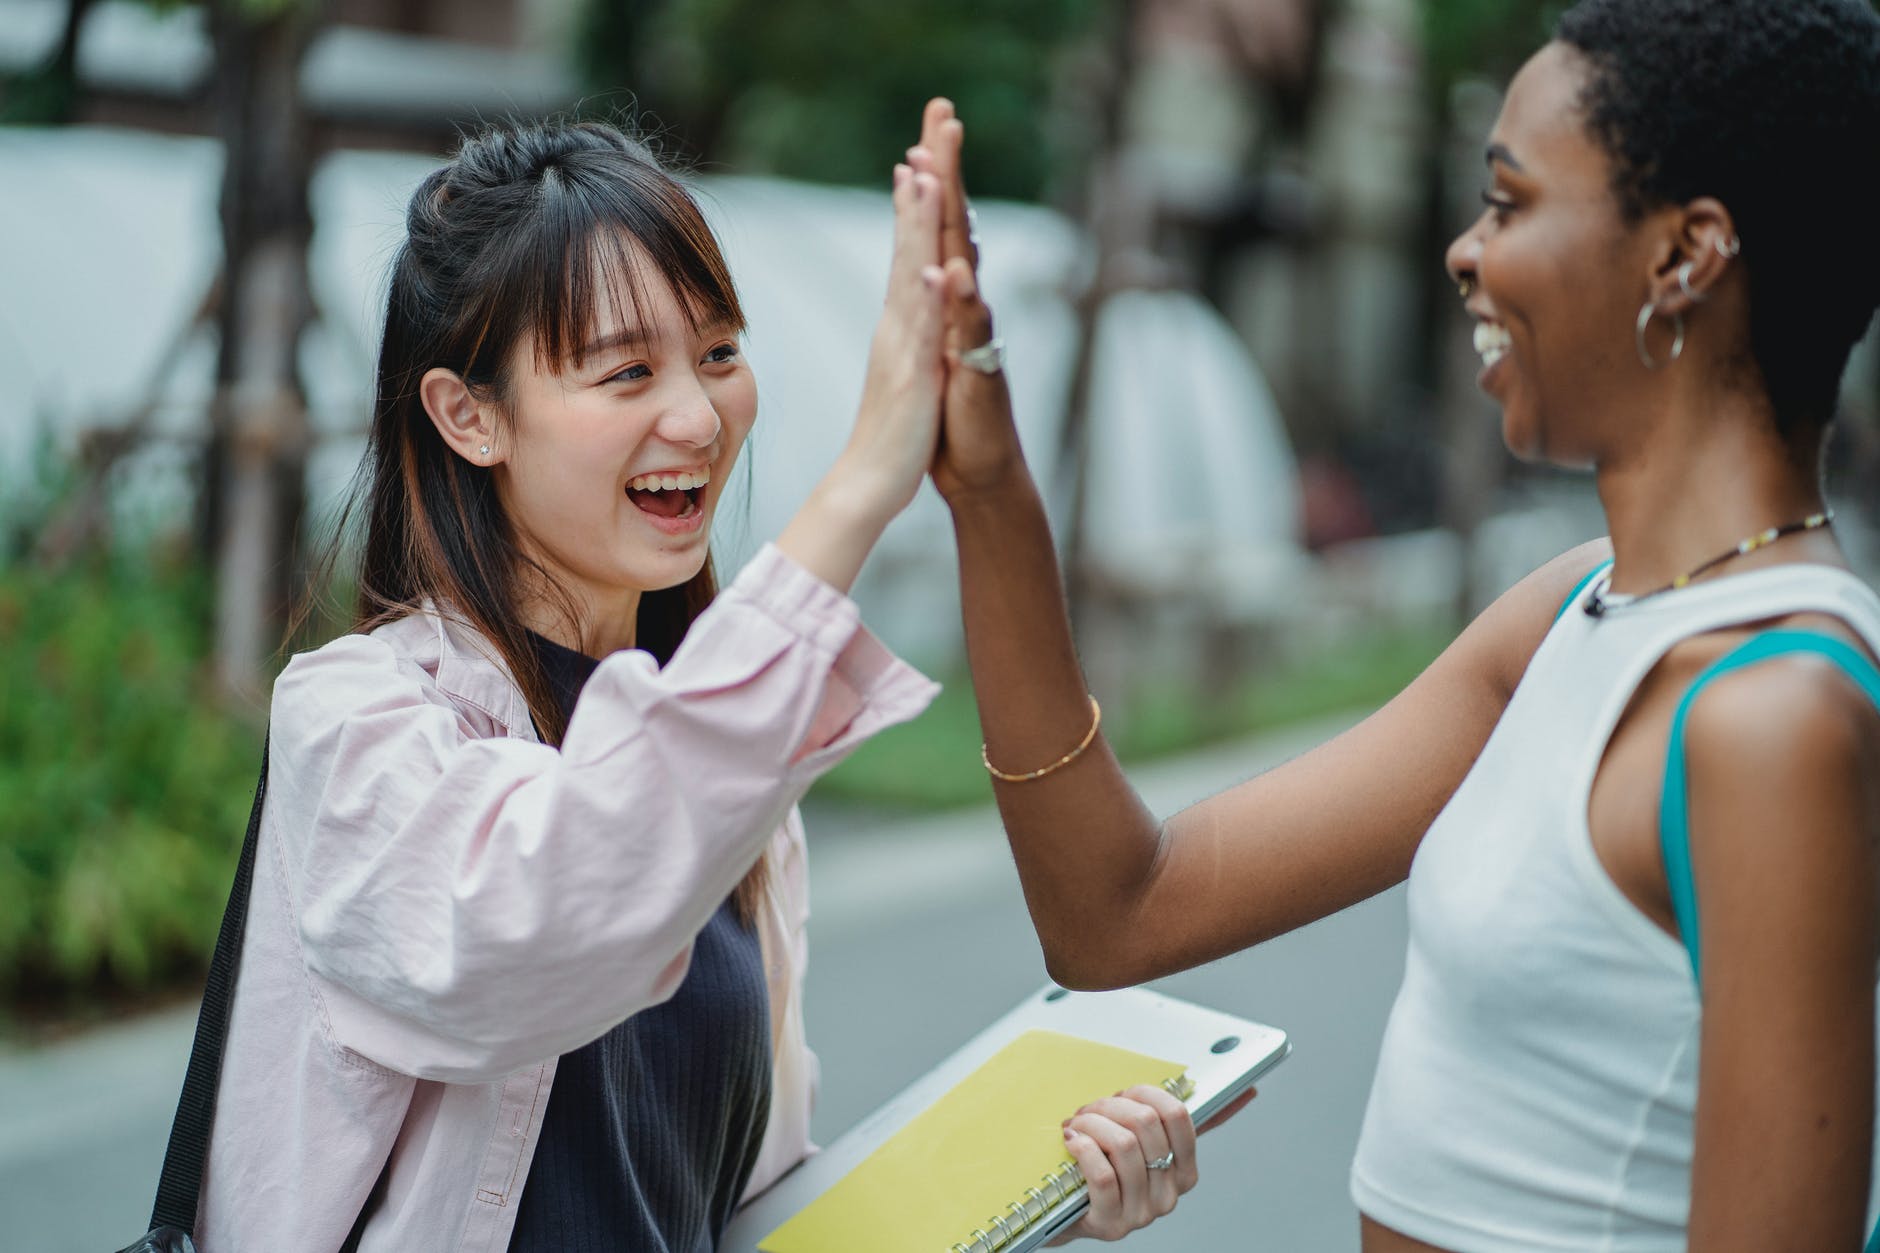 joyful diverse students giving high five in park